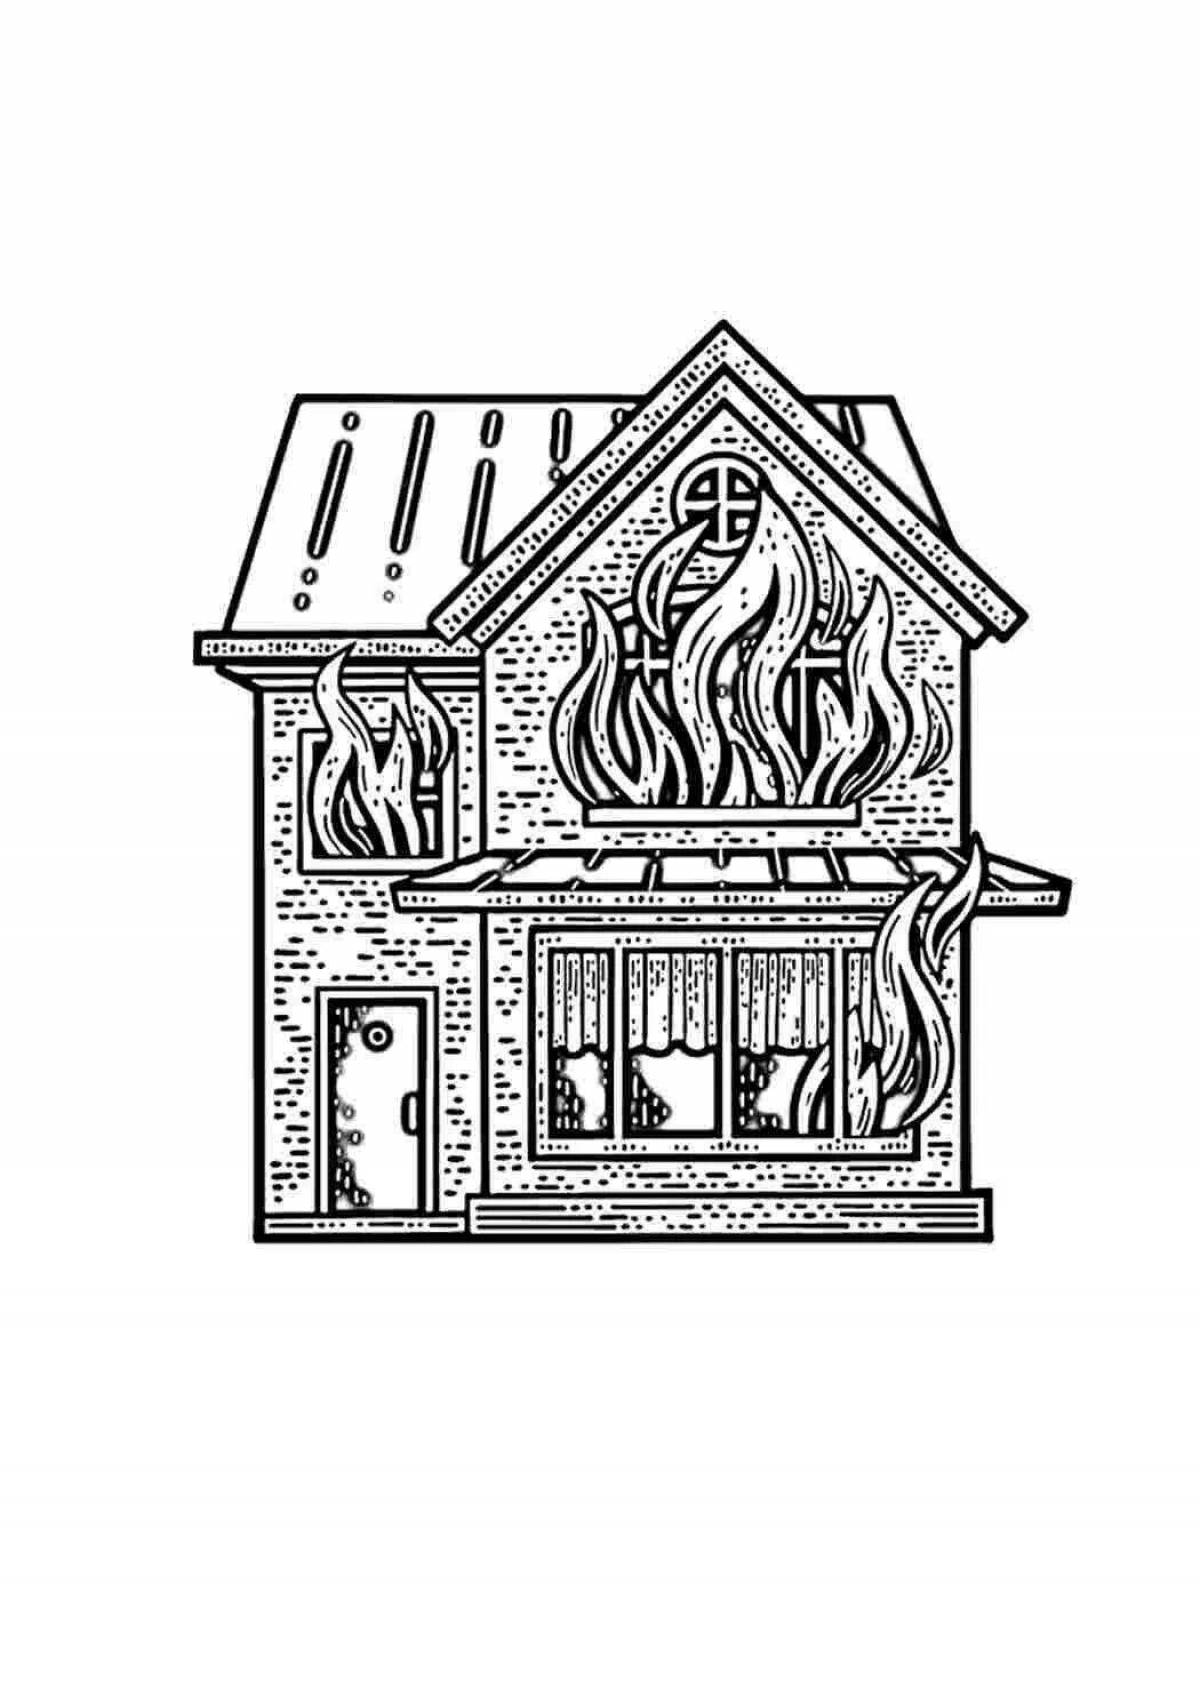 Outstanding burning house coloring book for kids